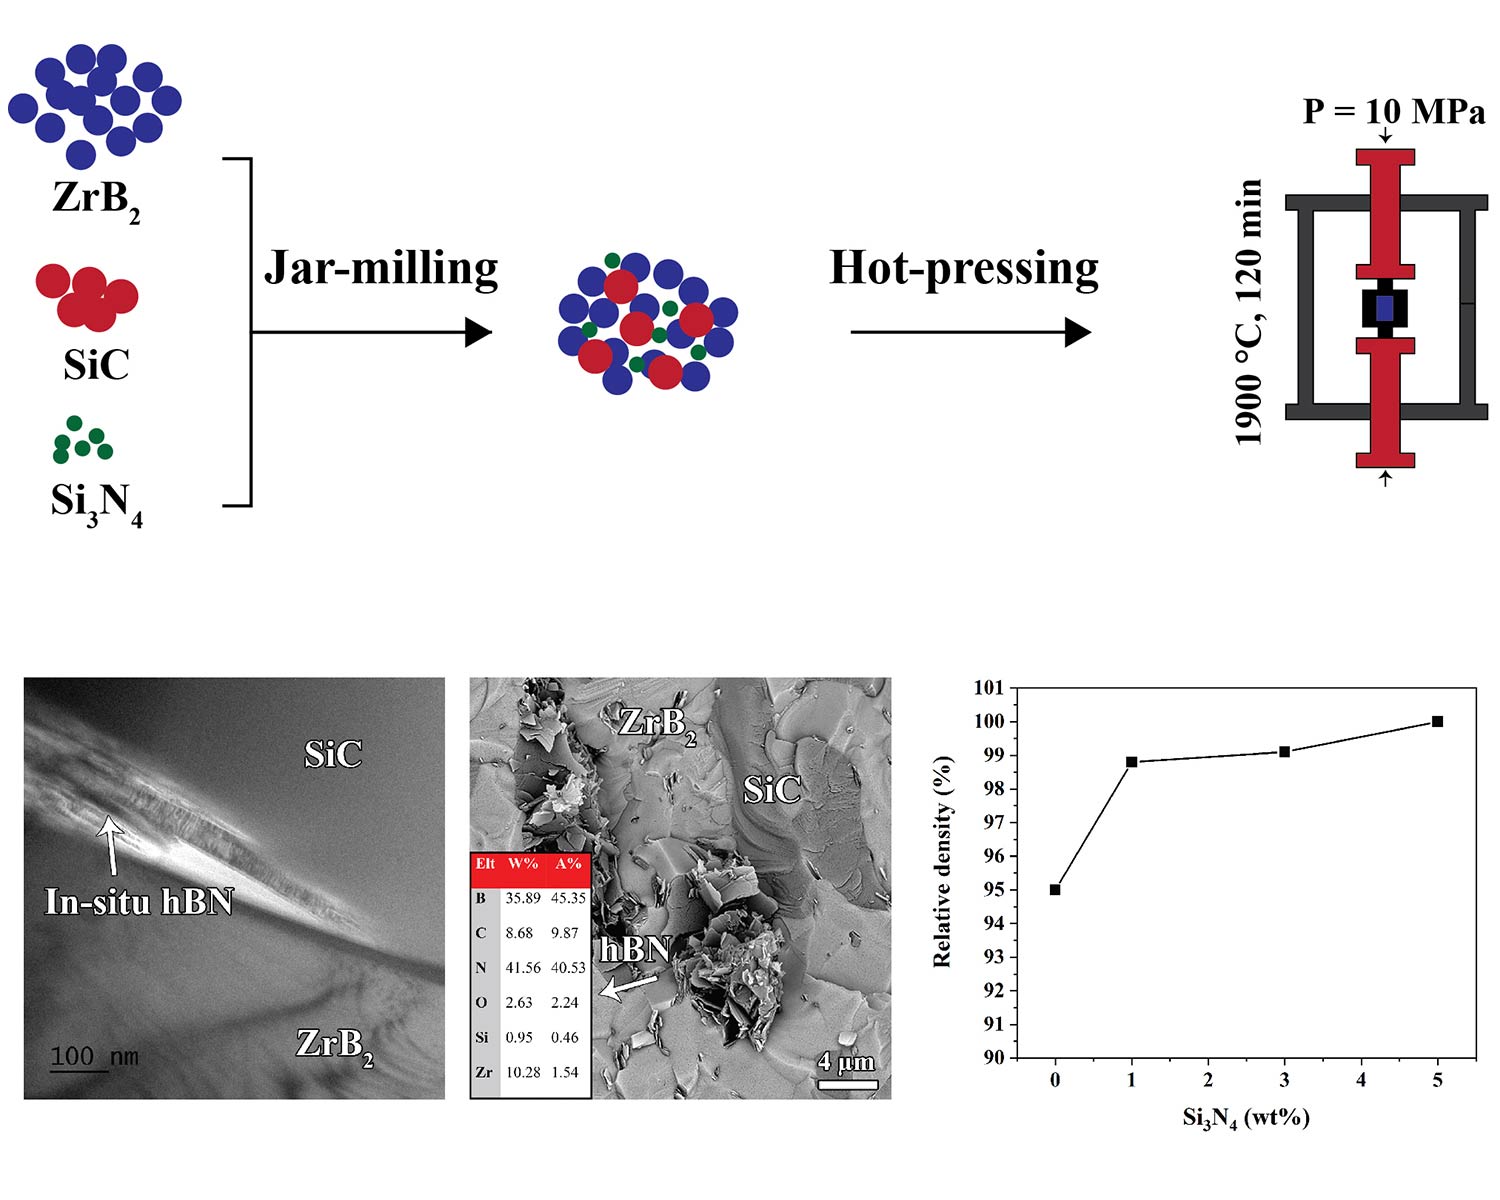 Role of Si3N4 on microstructure and hardness of hot-pressed ZrB2−SiC composites